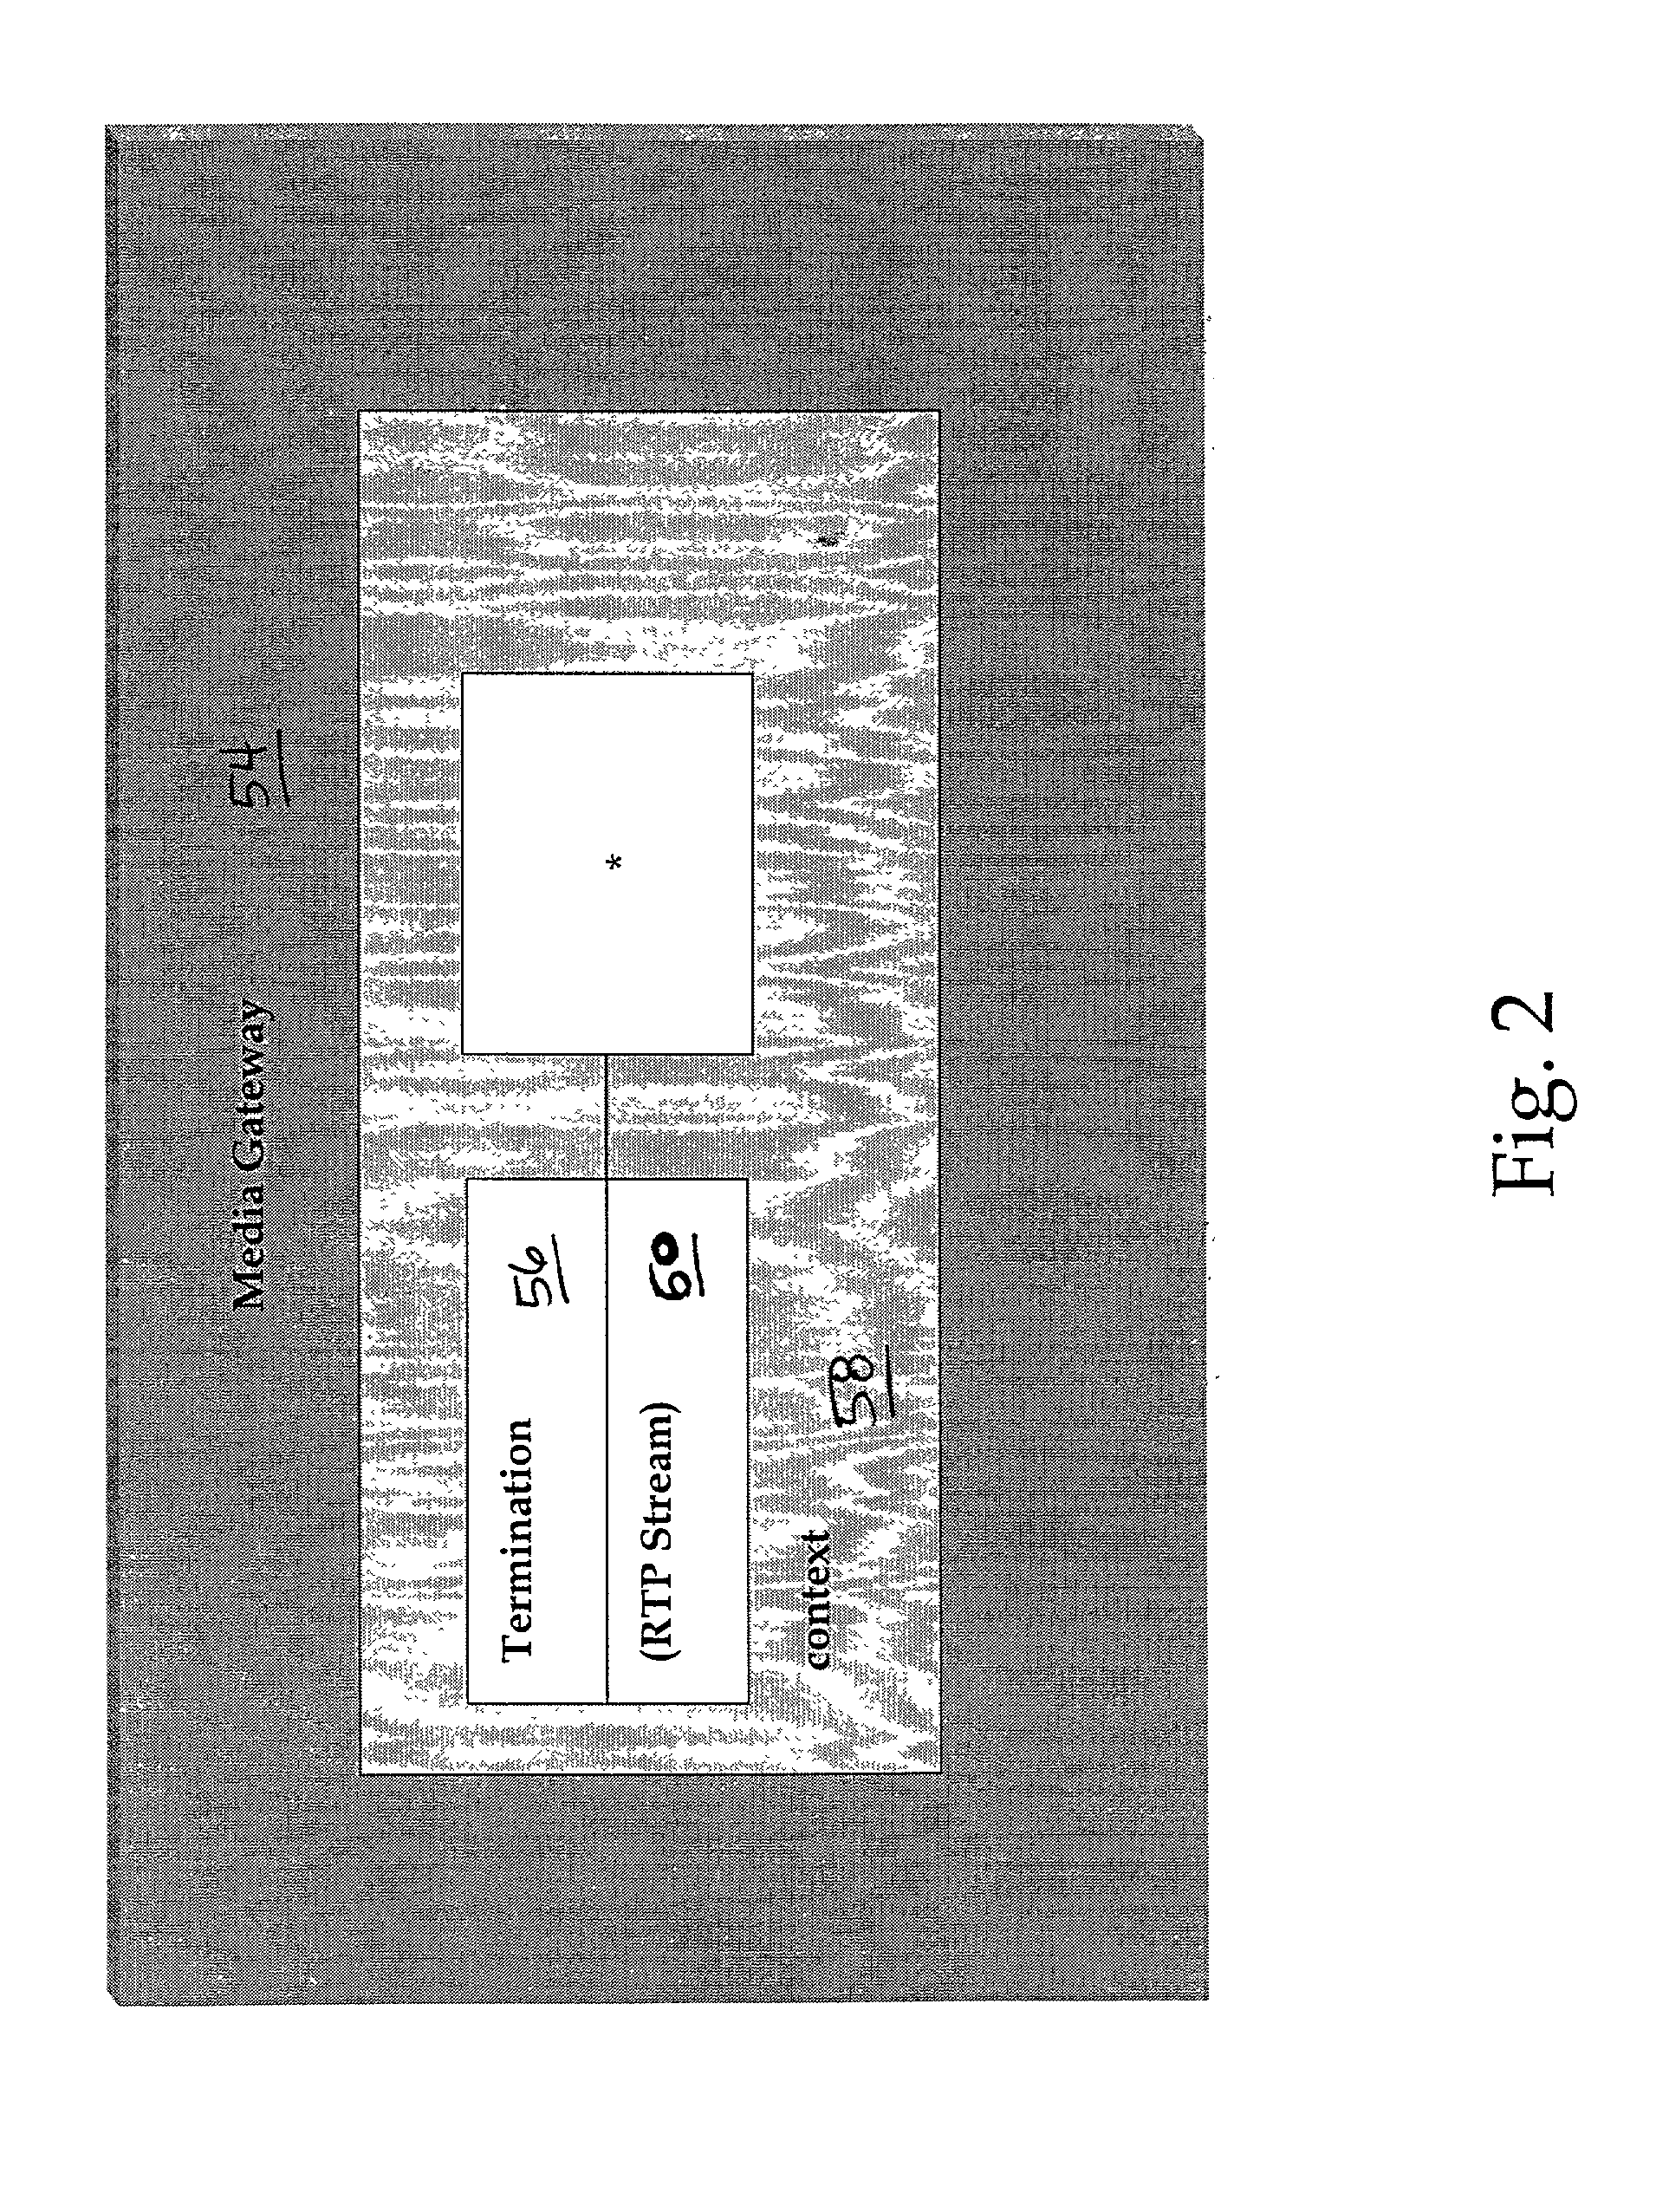 System and method for providing authentication and verification services in an enhanced media gateway